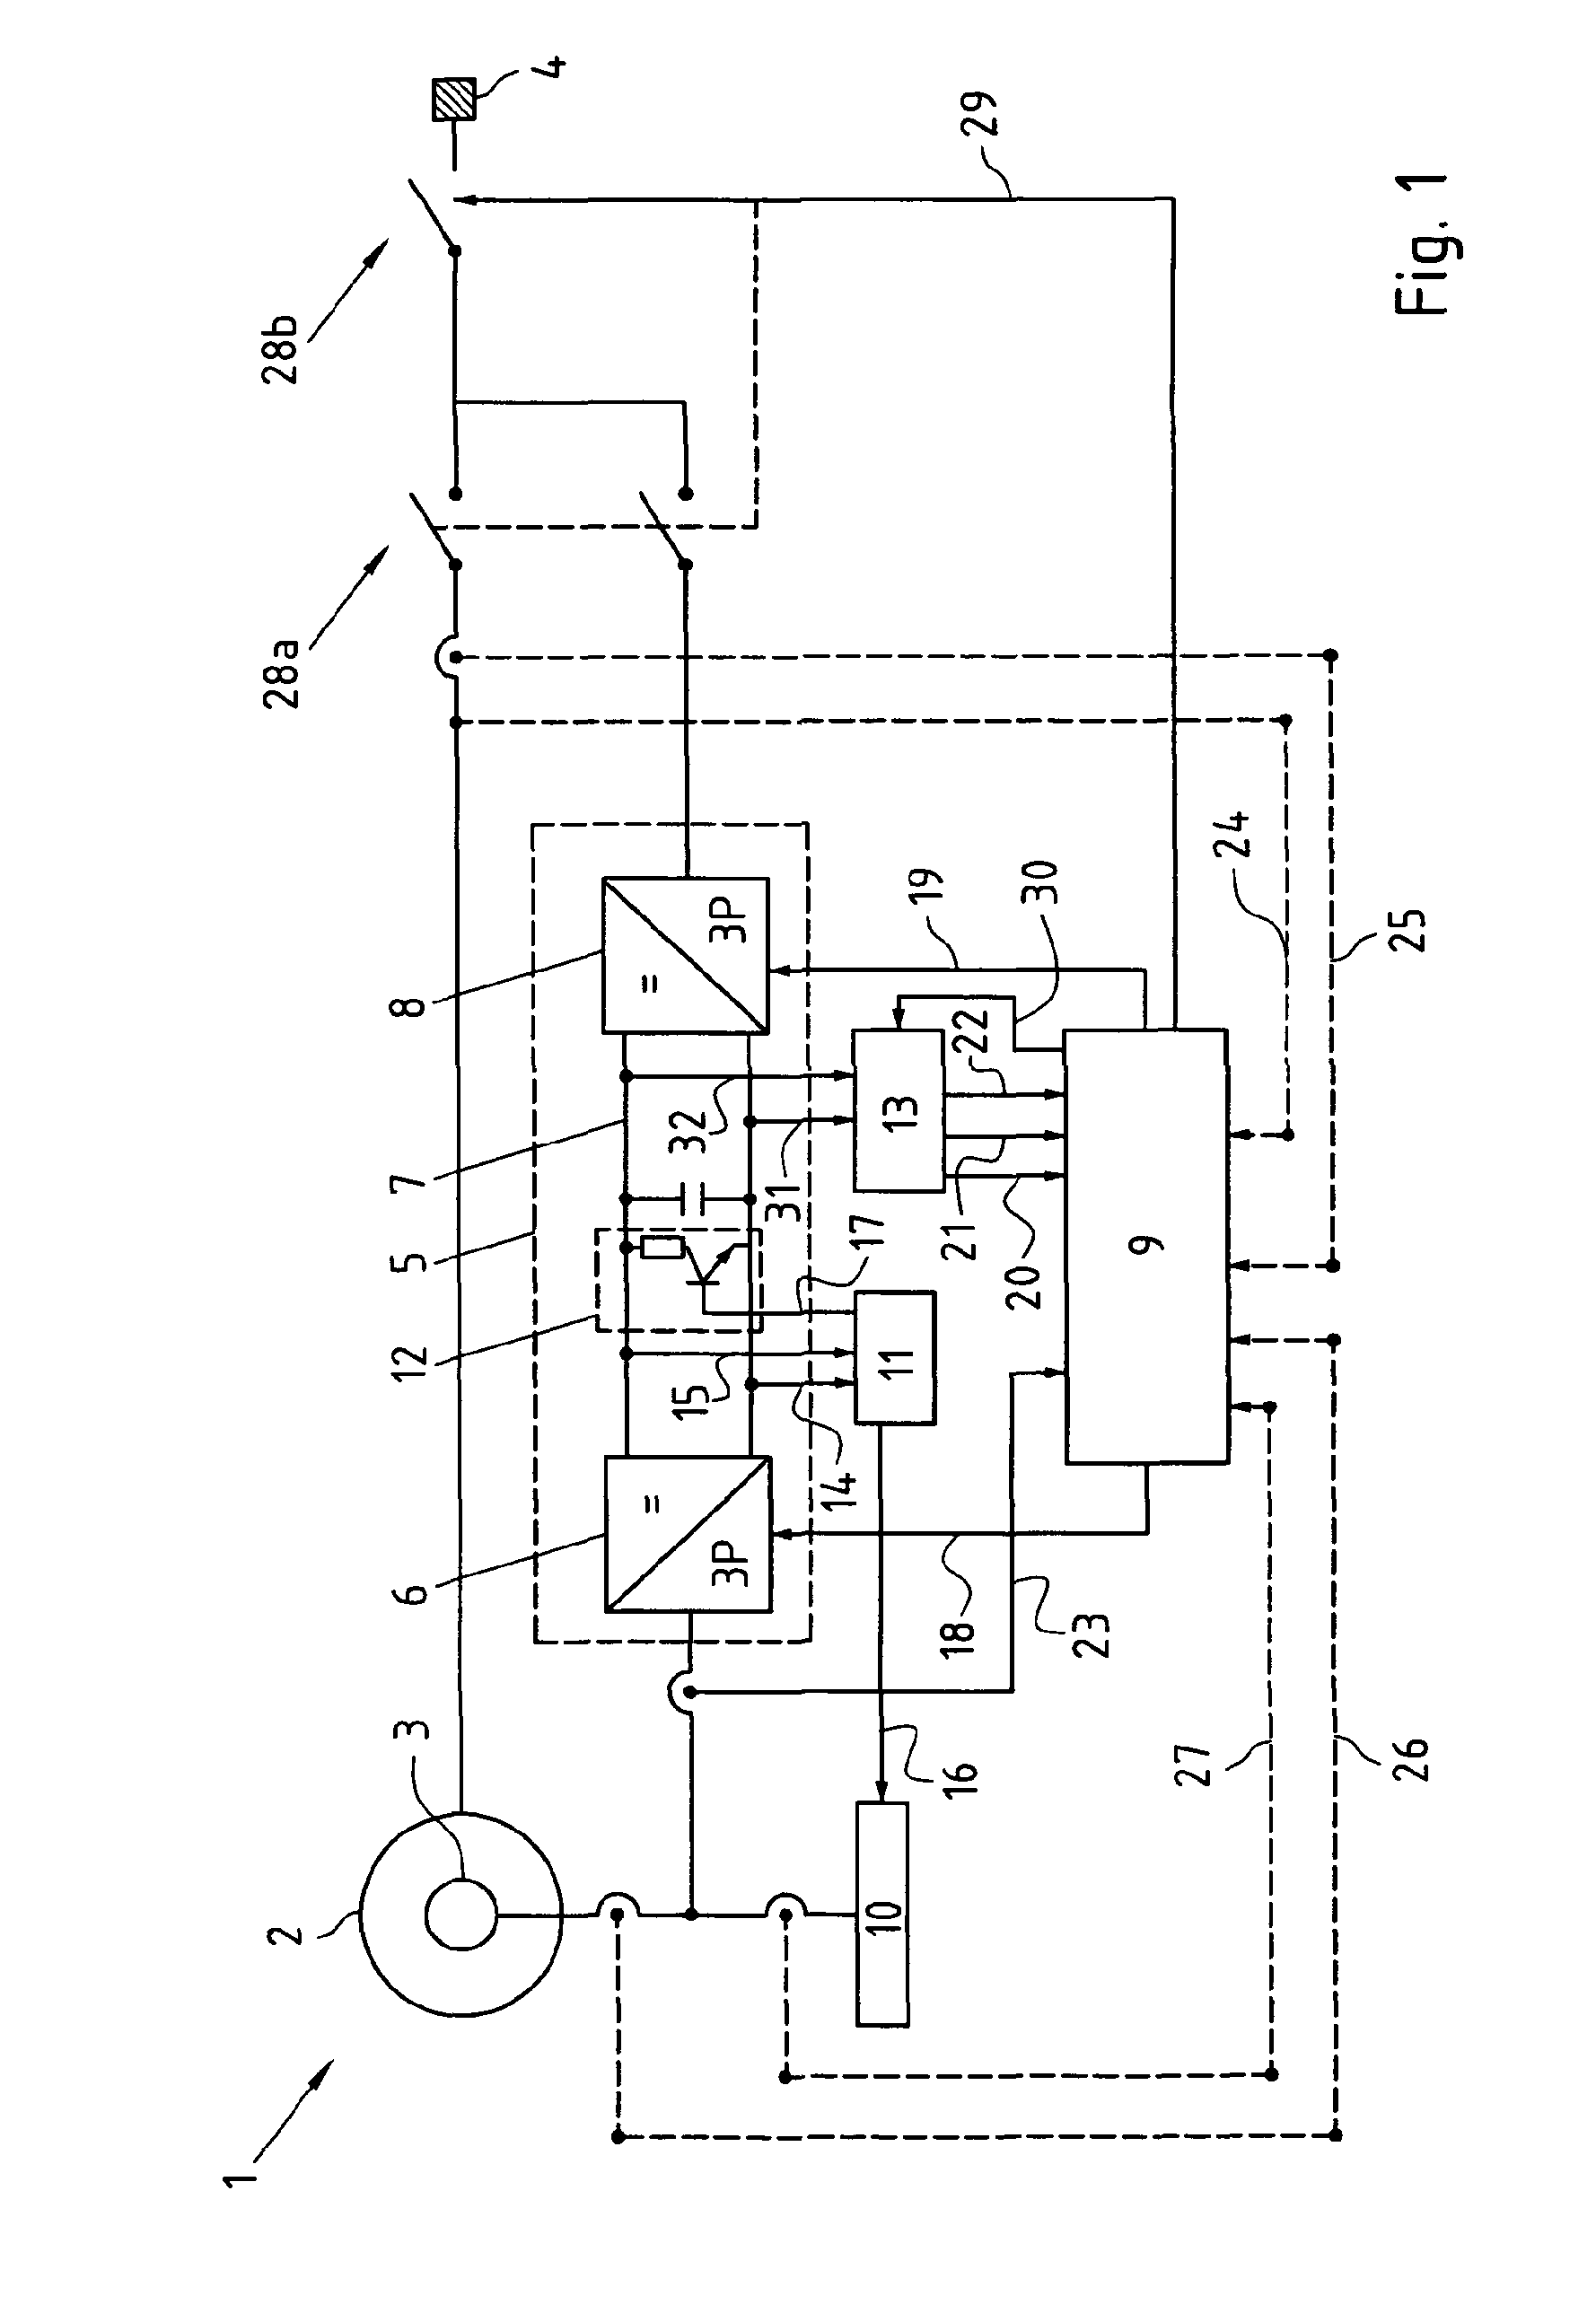 Protection system of a doubly-fed induction machine